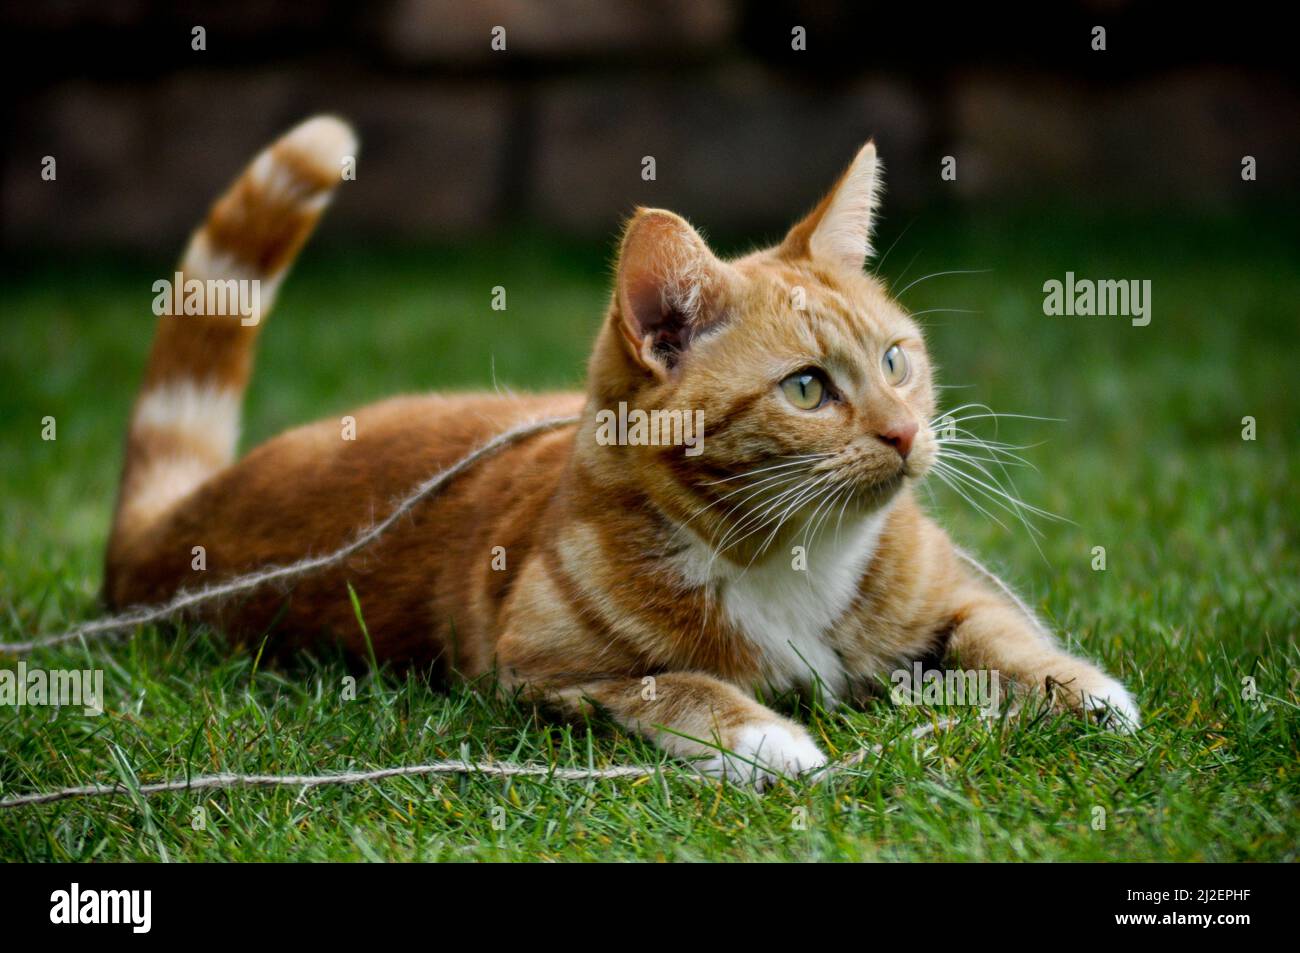 A pretty young ginger cat with white bib markings sitting outside on a grass lawn. Stock Photo